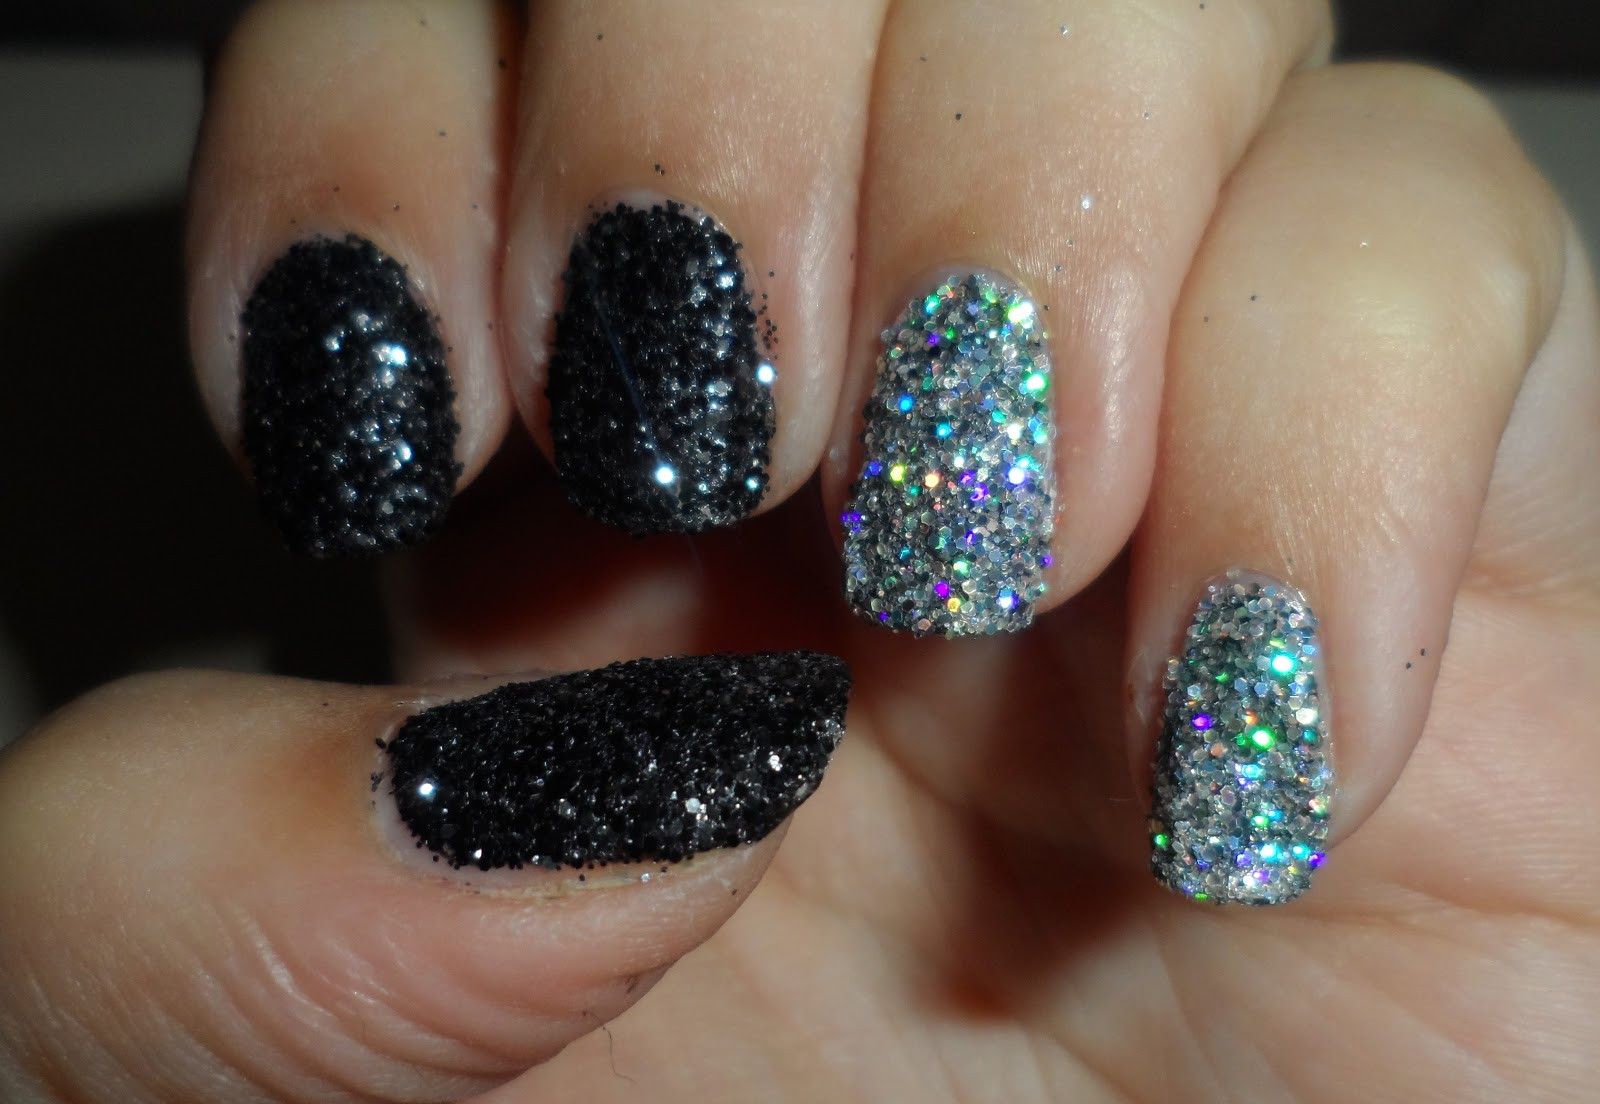 Sparkly Glitter Nails
 NOTD Nails Inc Bling it on rocks extreme sparkly glitters